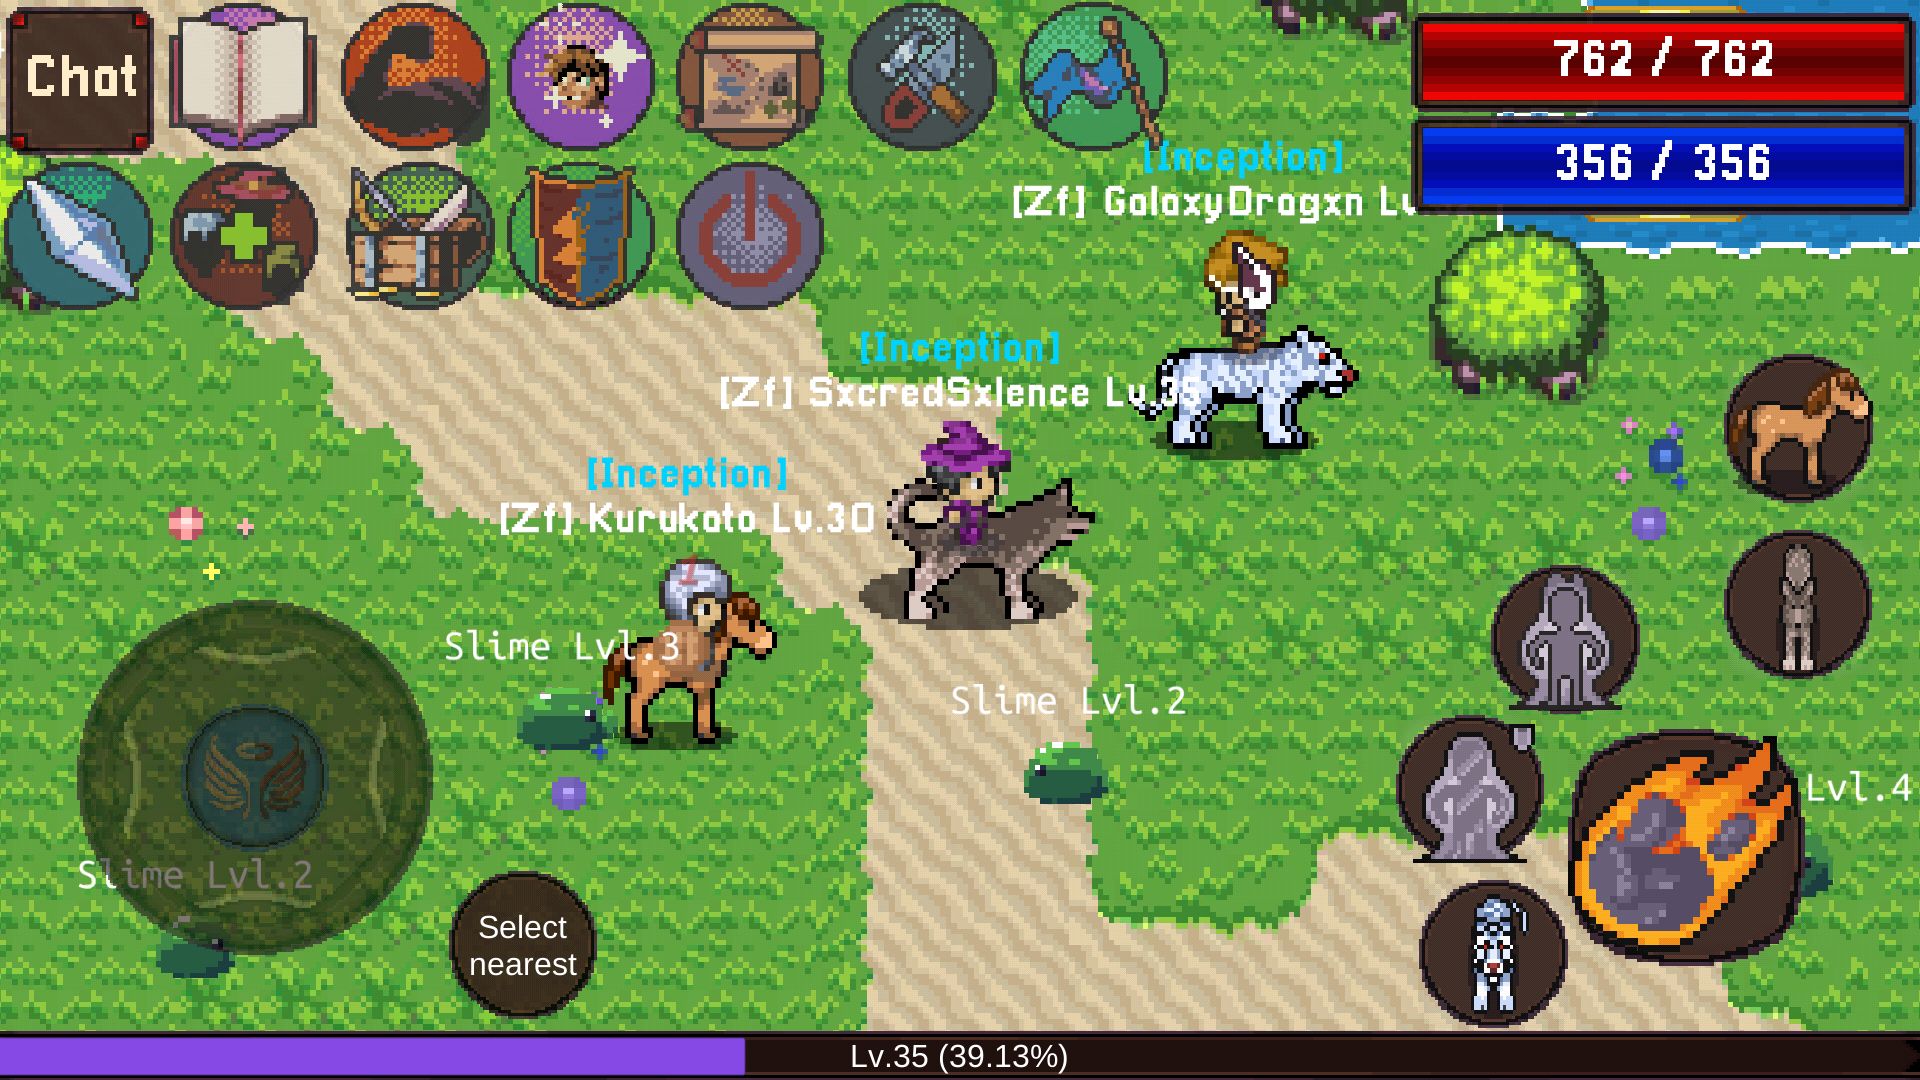 Elysium Online - MMORPG (Alpha) for Android